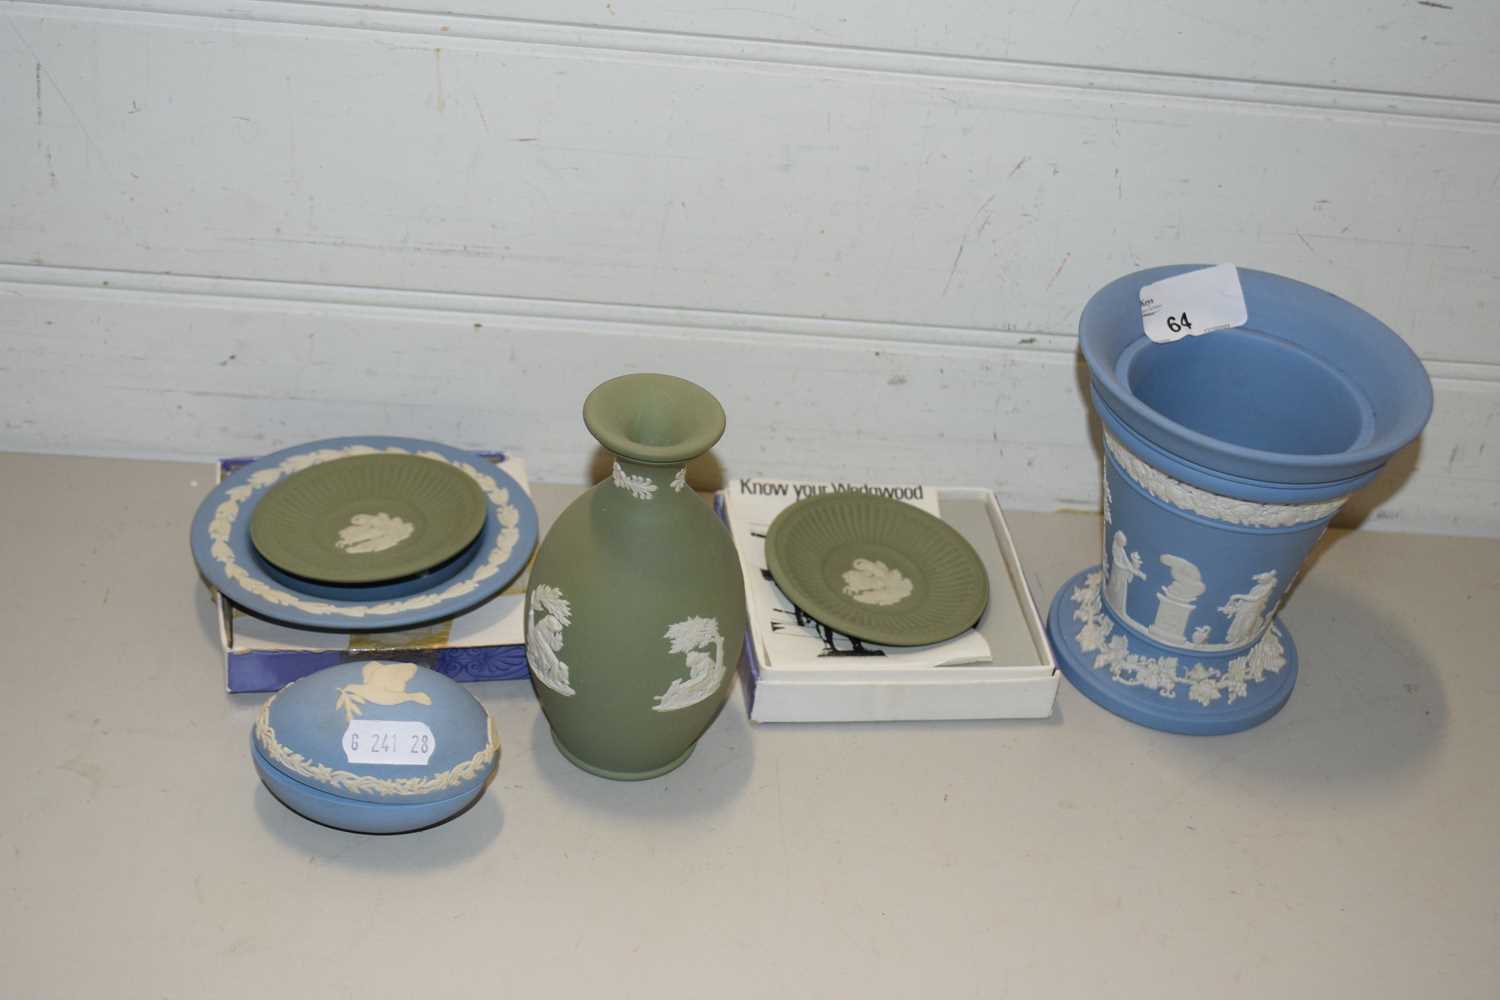 QUANTITY OF WEDGWOOD JASPER WARES AND BLUE AND GREEN